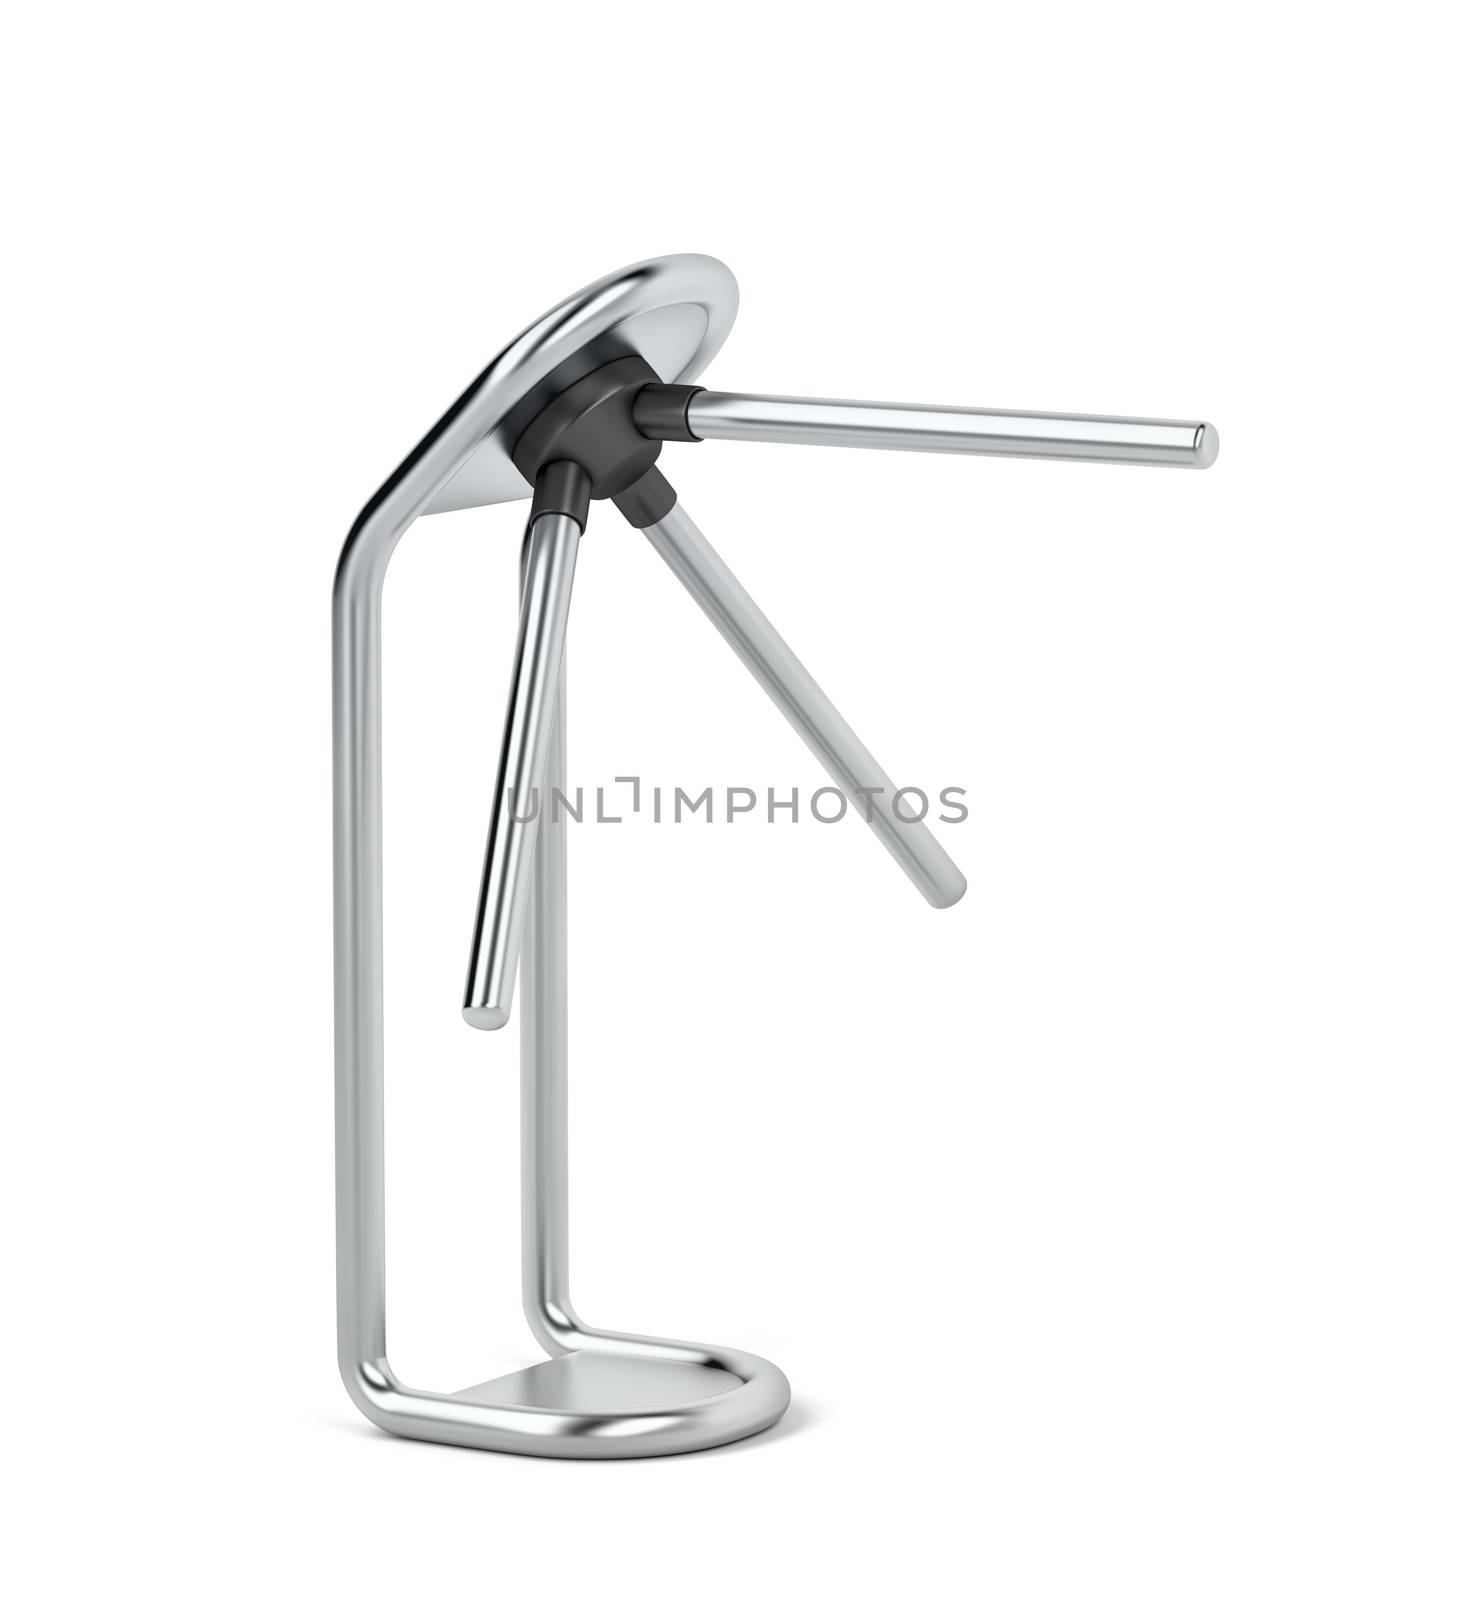 Steel turnstile on white background by magraphics